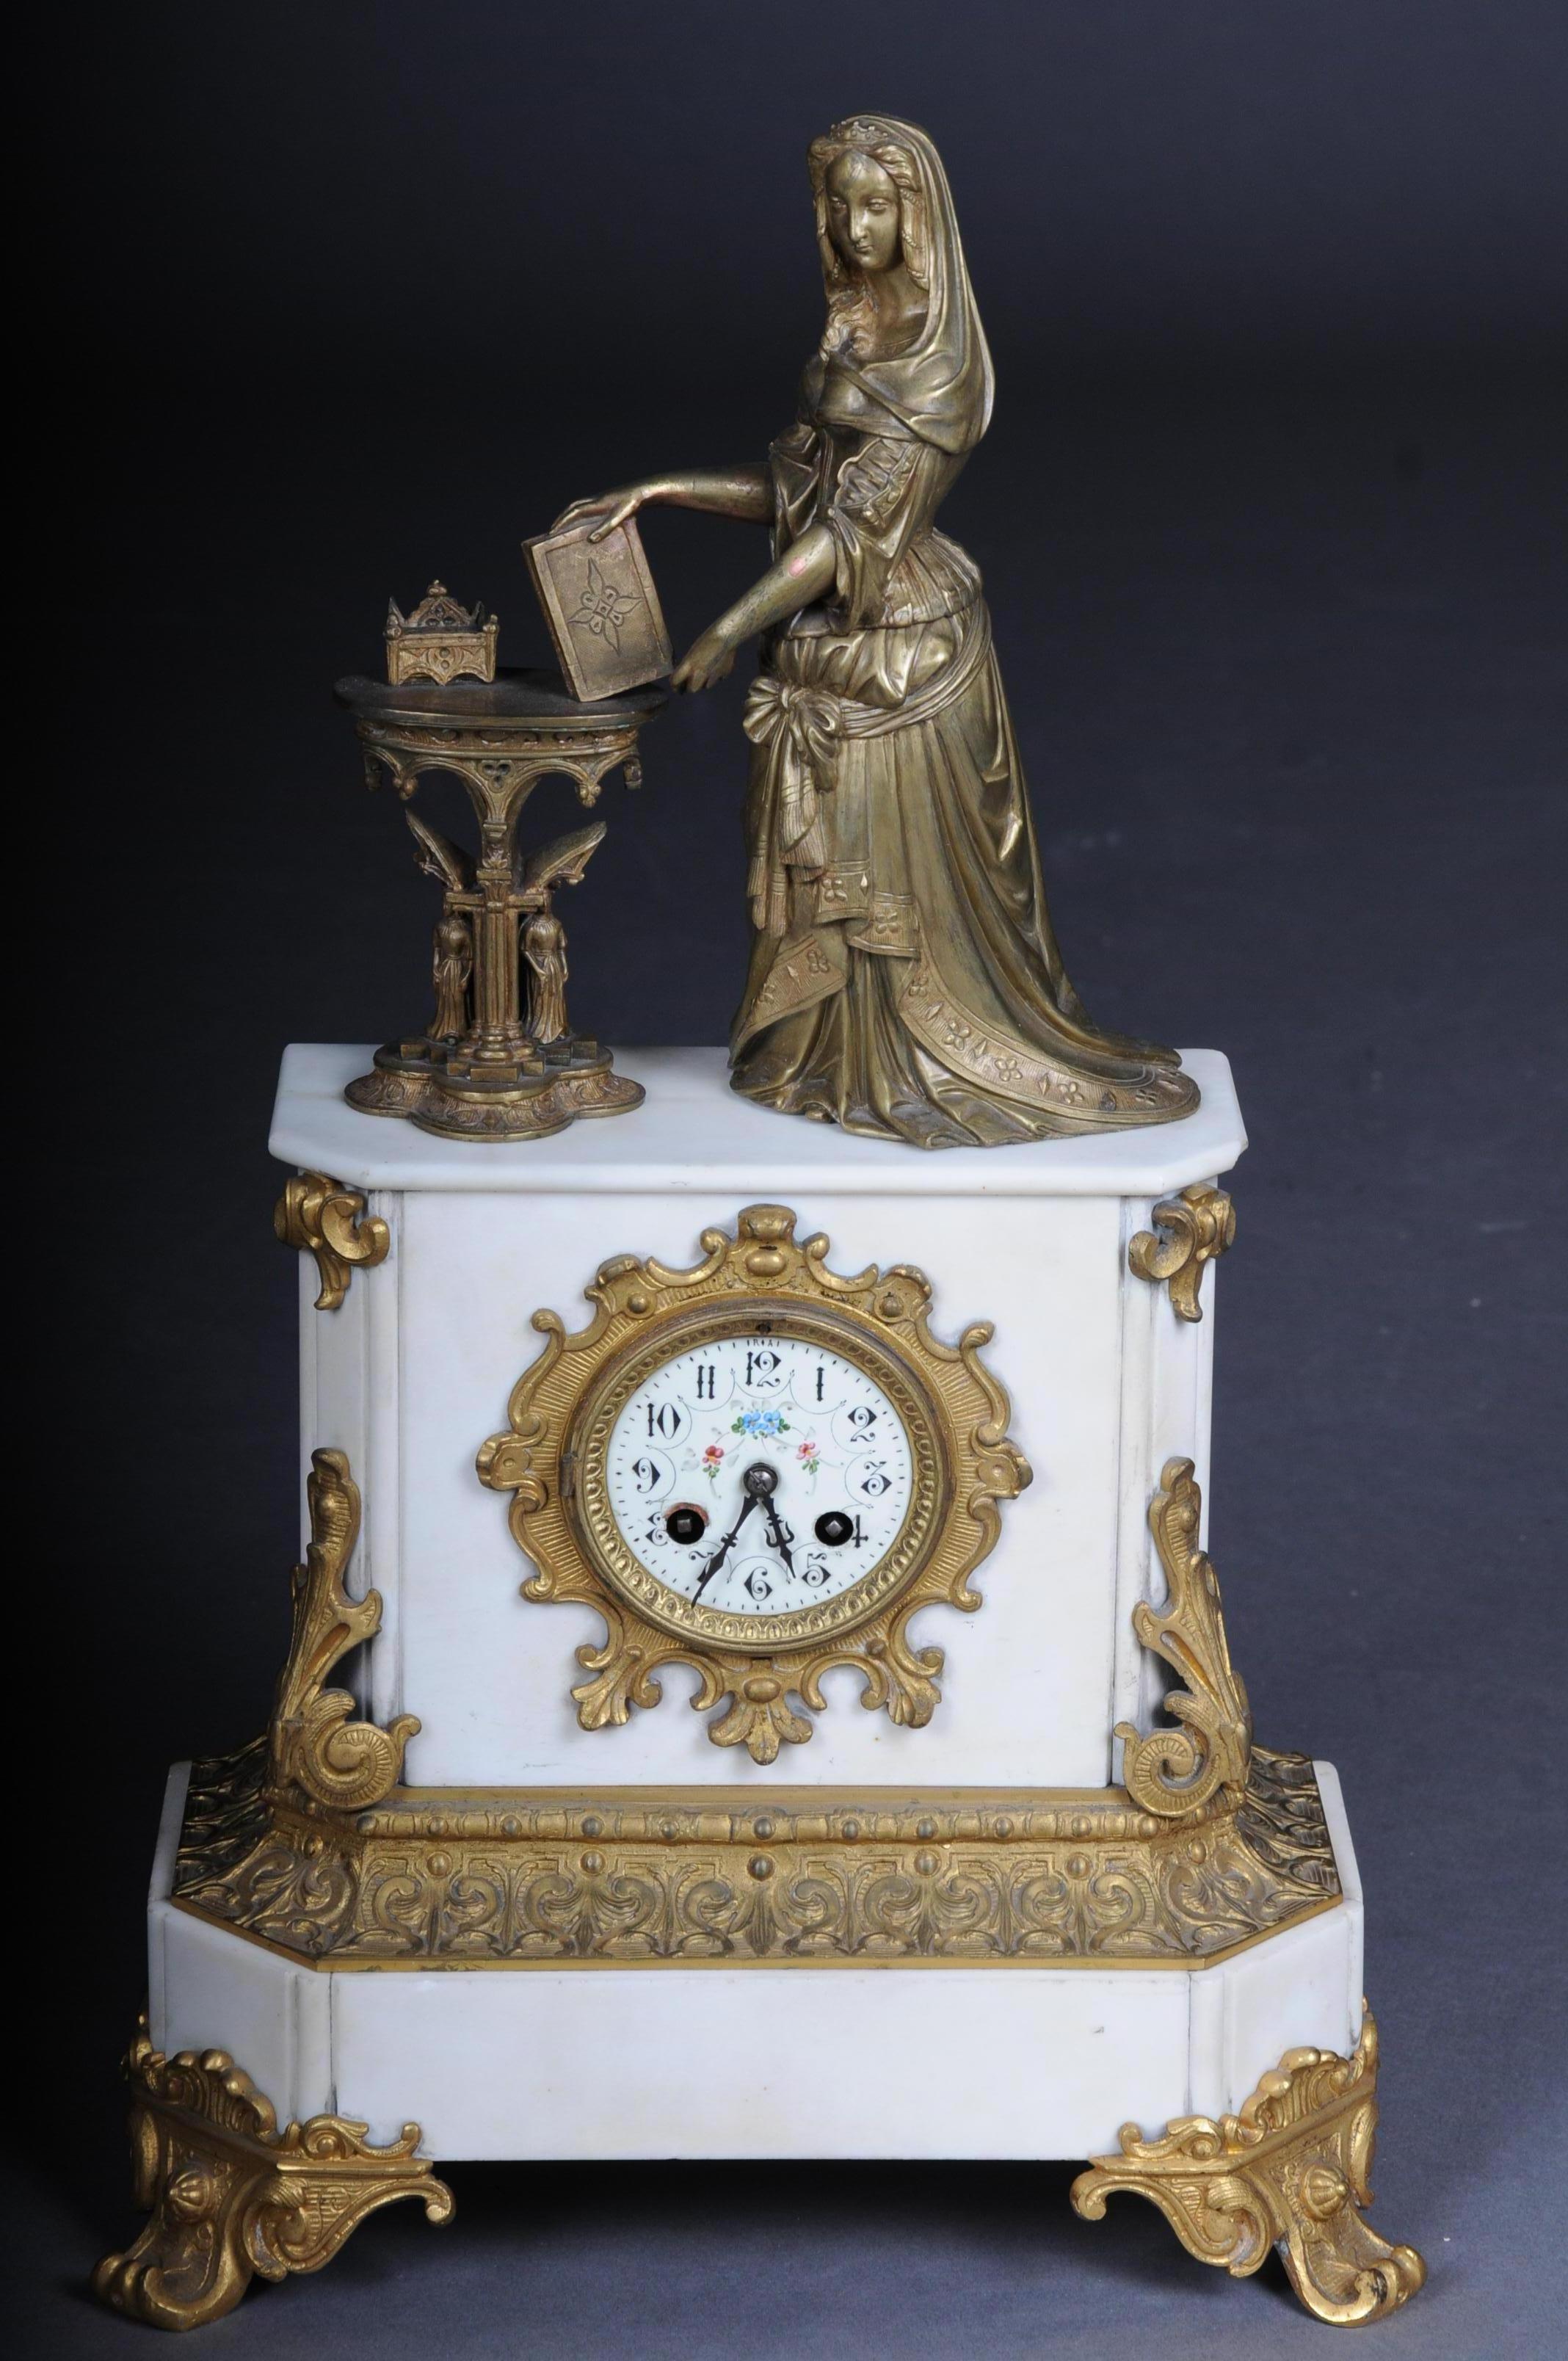 Magnificent historicism clock or mantel clock from circa 1890

On the pedestal there is a figure of a noble lady with a diadem and book at a Gothic table, with writing utensils on it. Enamel dial with arched frieze. Hook walk. Half hour strike on